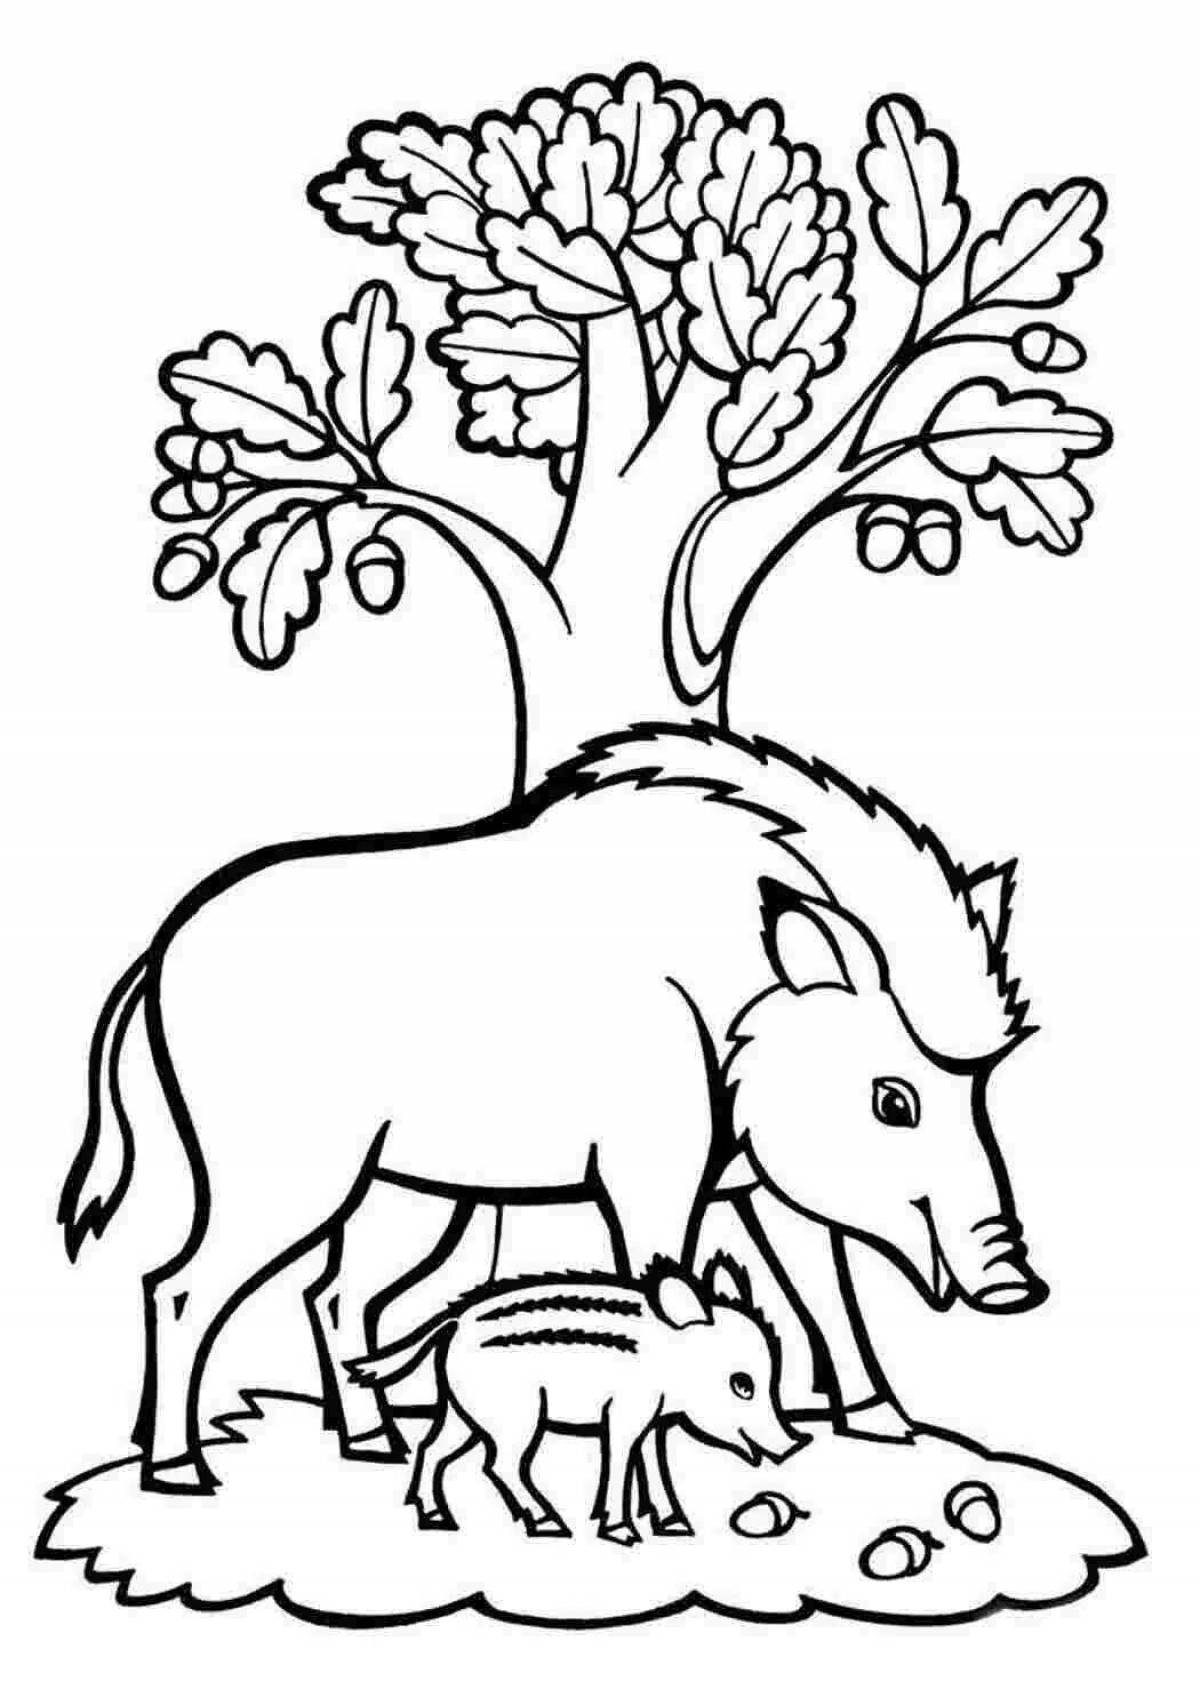 Cute forest animals coloring pages for kids